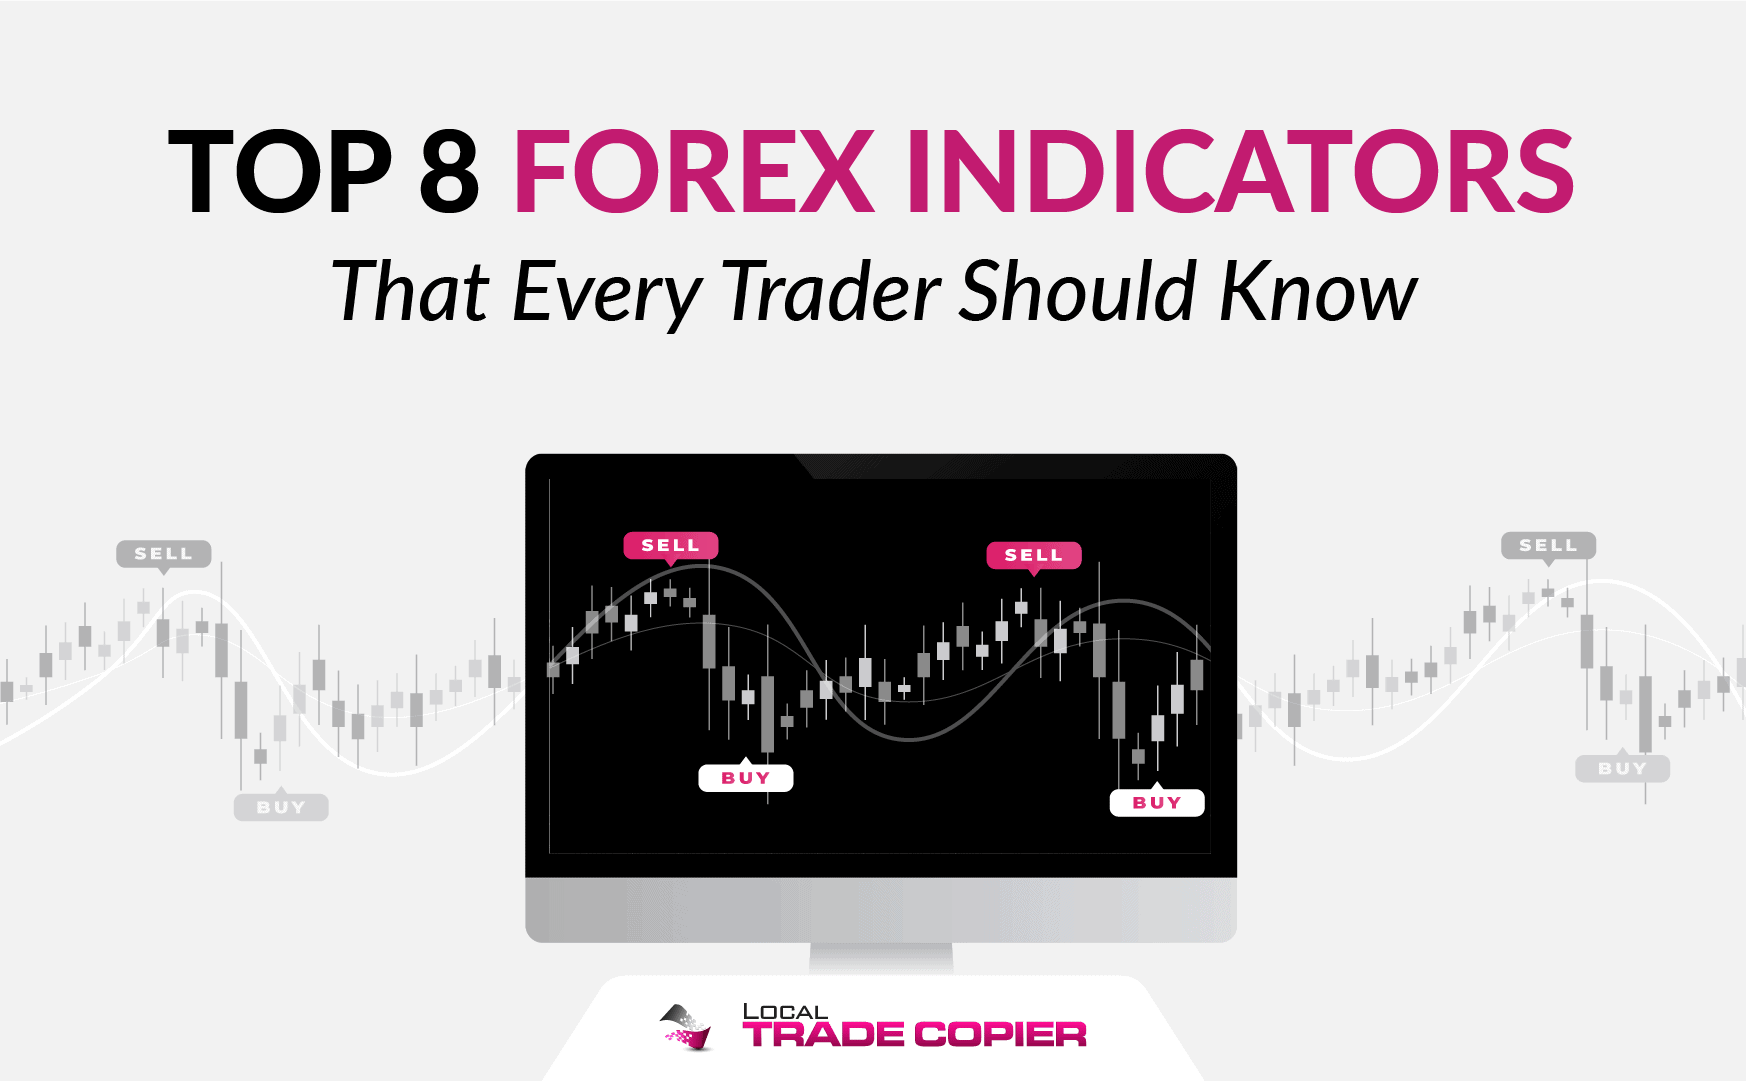 Top 8 Forex Indicators That Every Trader Should Know